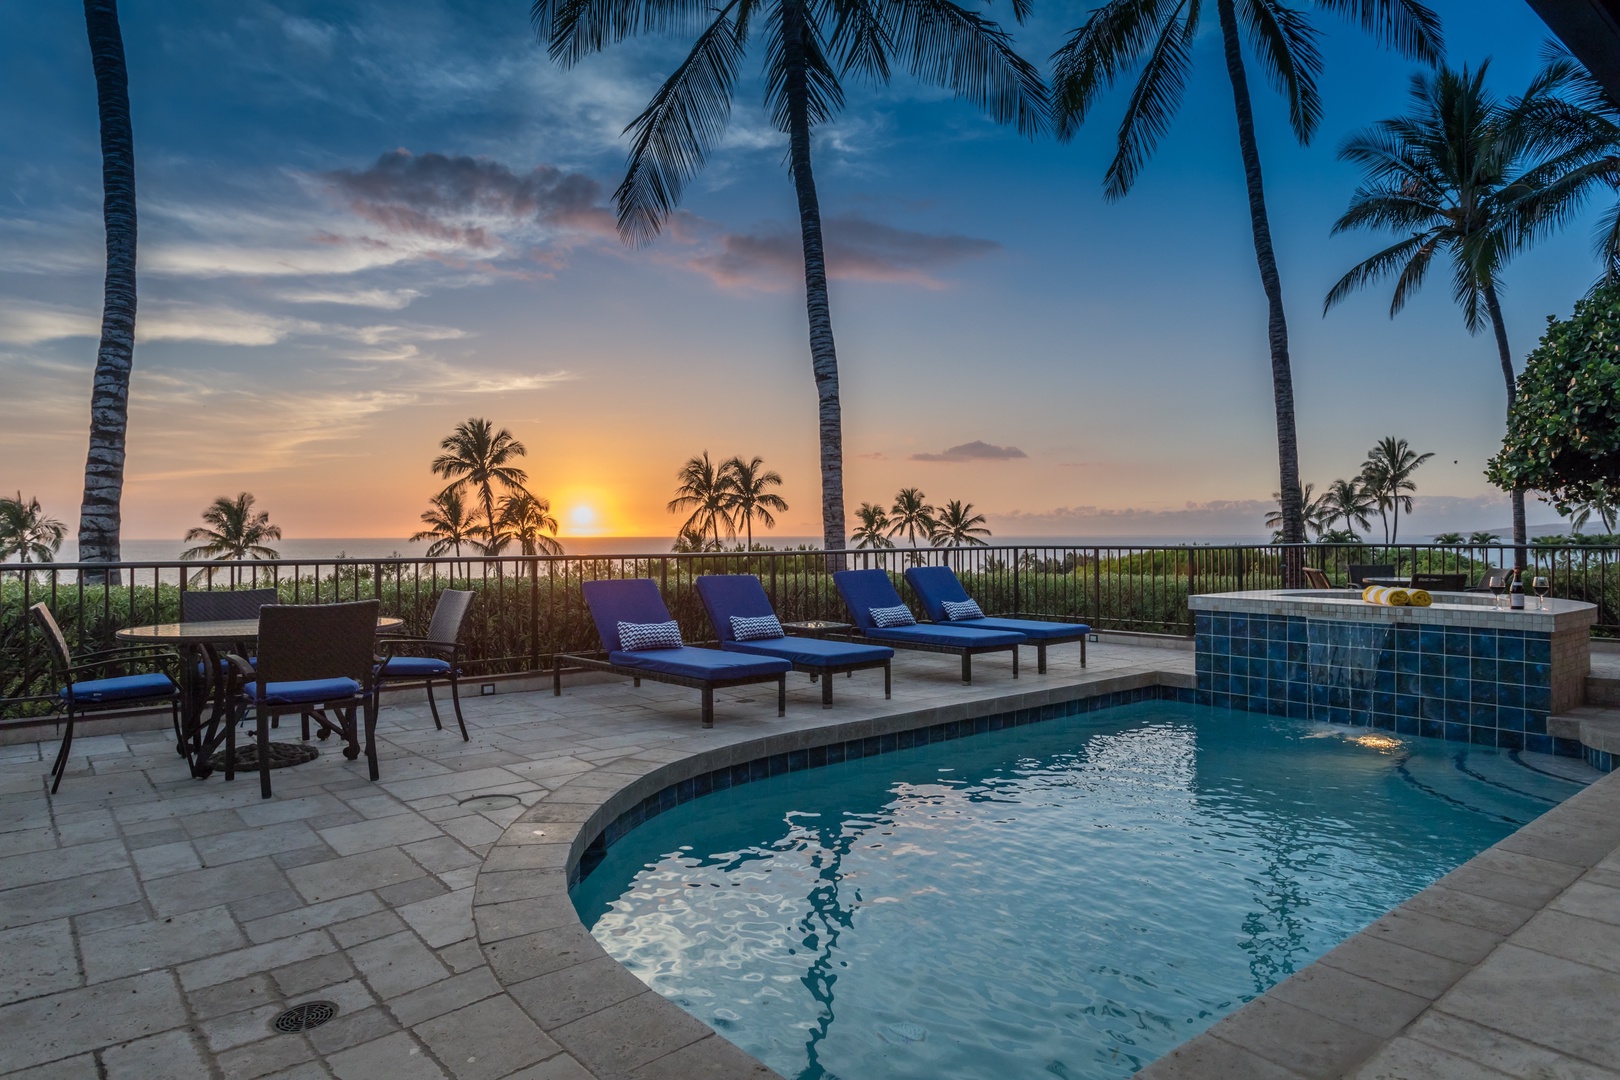 Kamuela Vacation Rentals, 3BD Villas (39) at Mauna Kea Resort - Gorgeous ocean and sunset views from private pool deck.